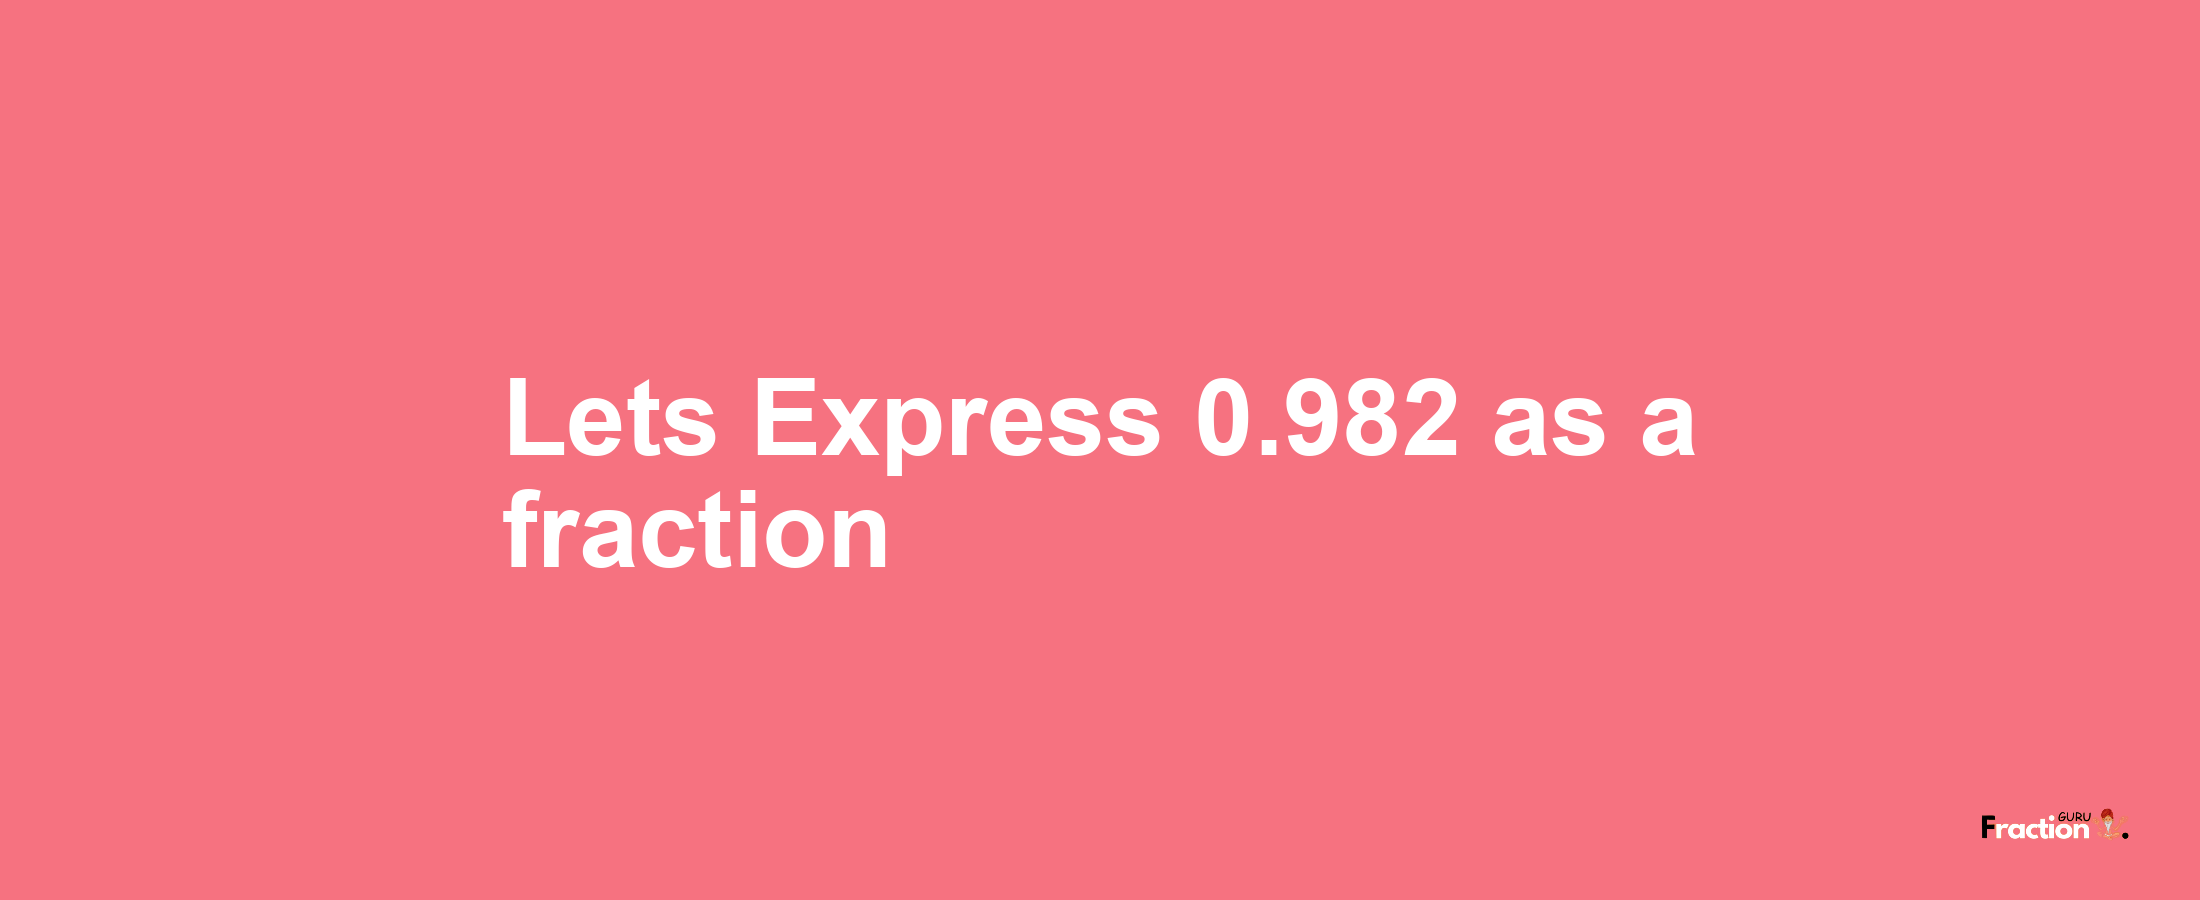 Lets Express 0.982 as afraction